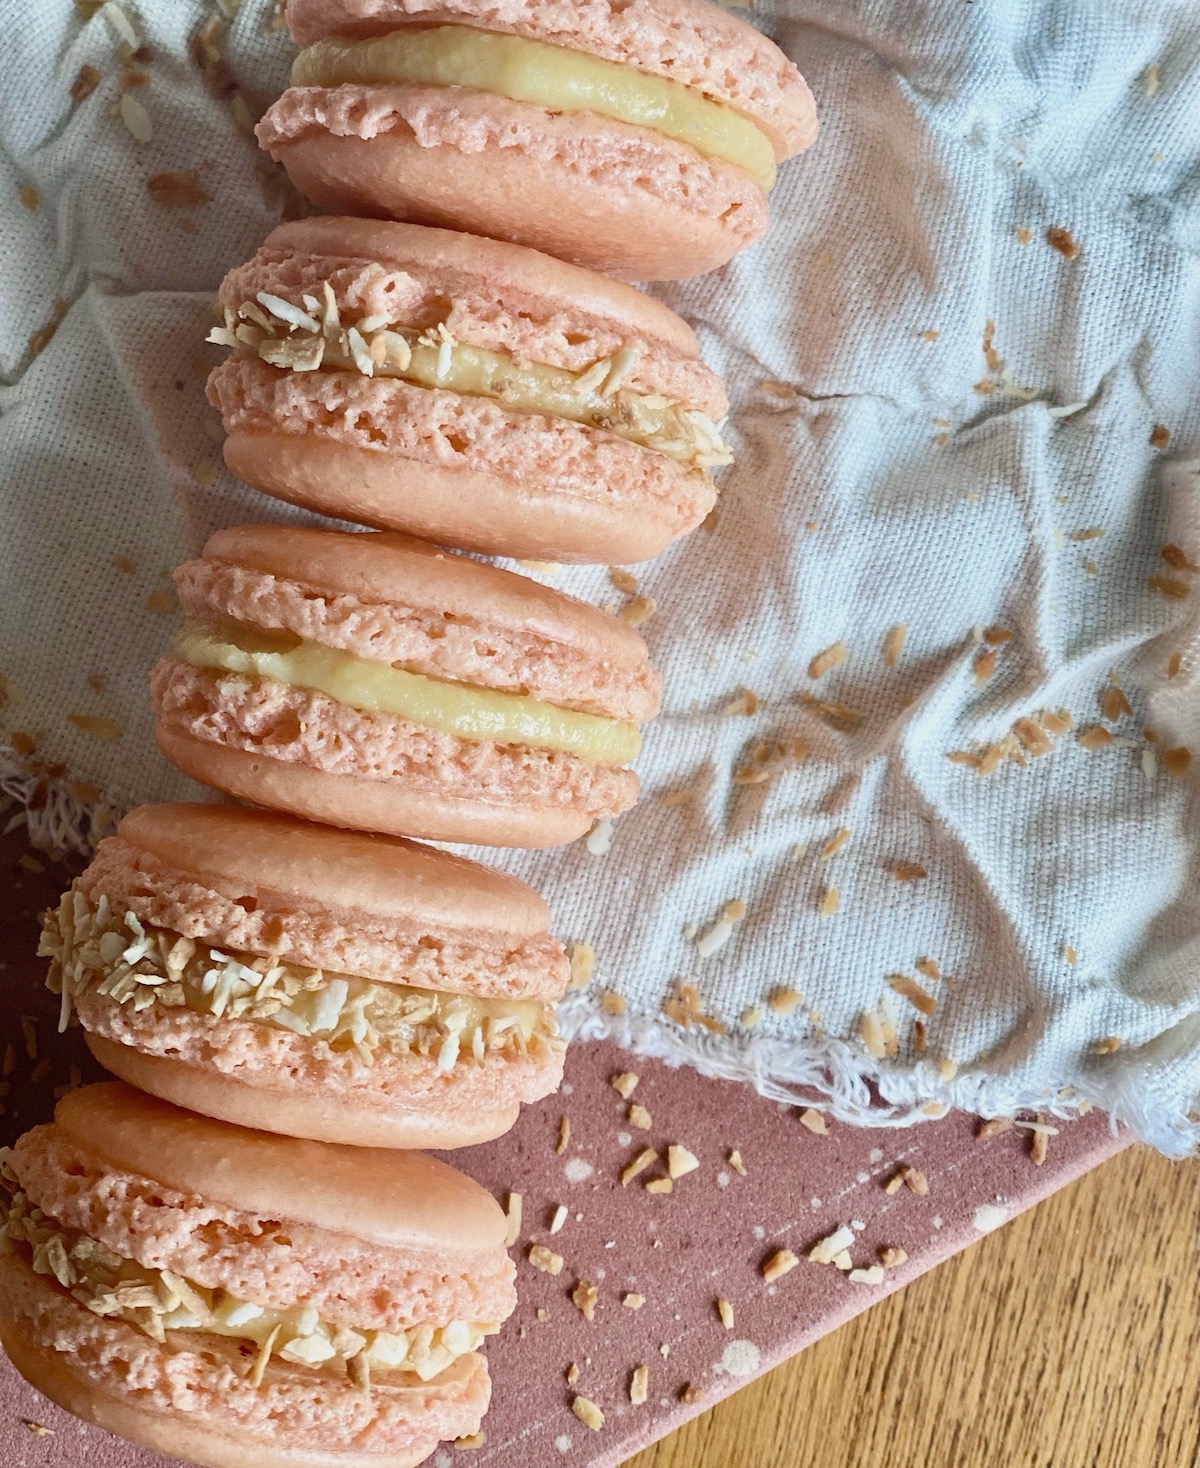 Mouthwatering Passionfruit Macarons